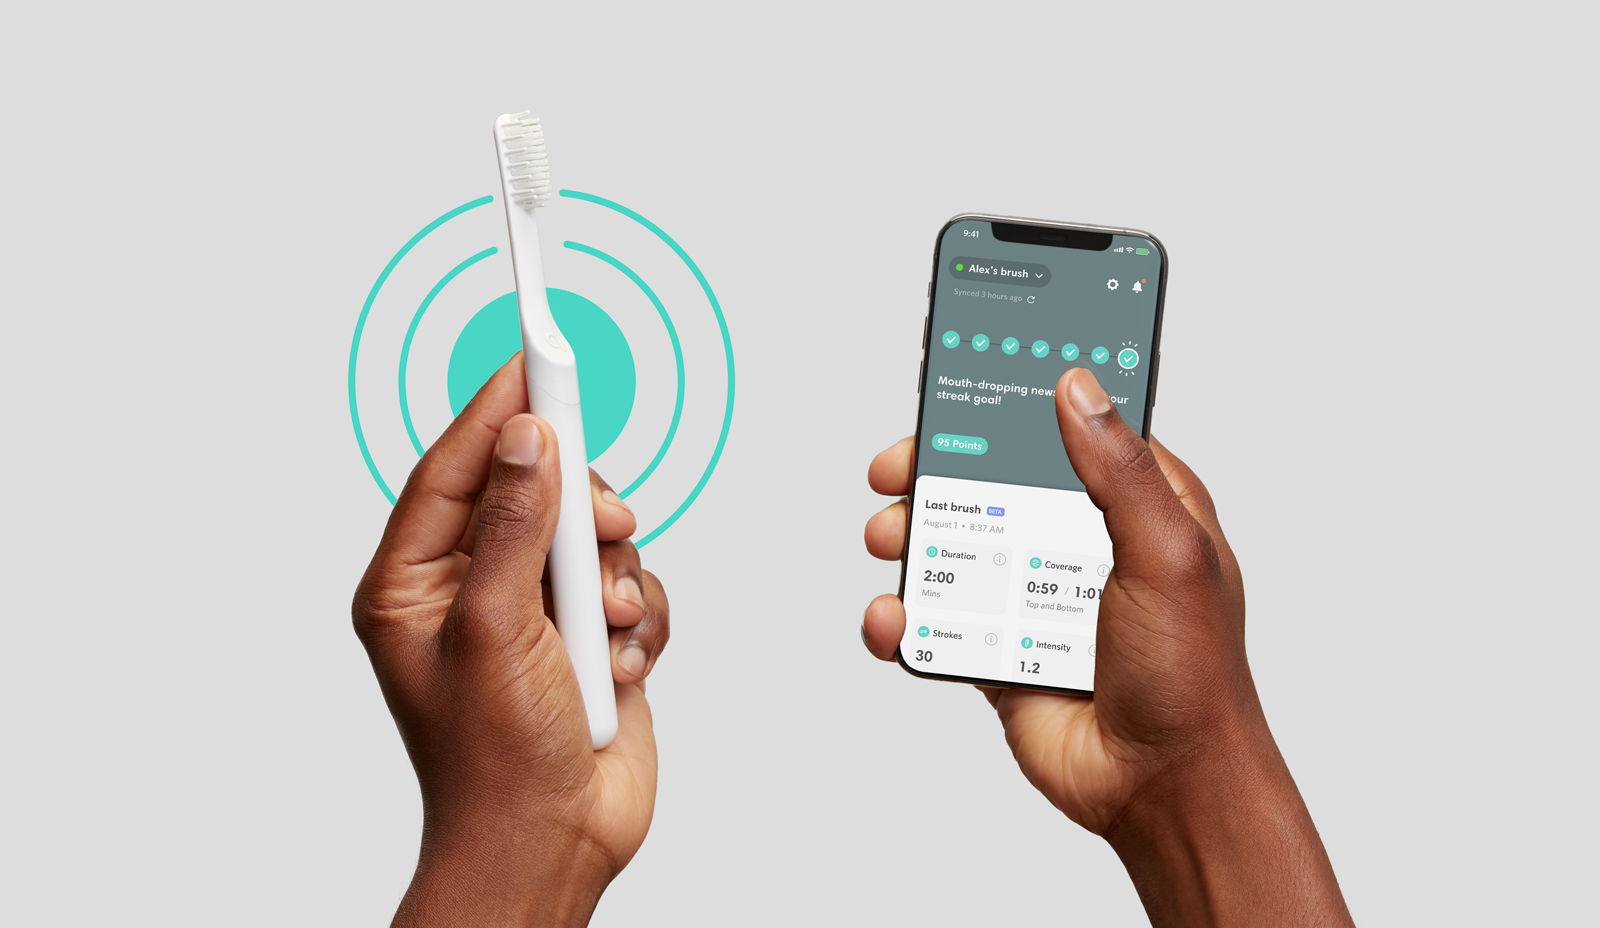 The quip Smart Brush and Smart Motor help remind and track your brushing routine. 